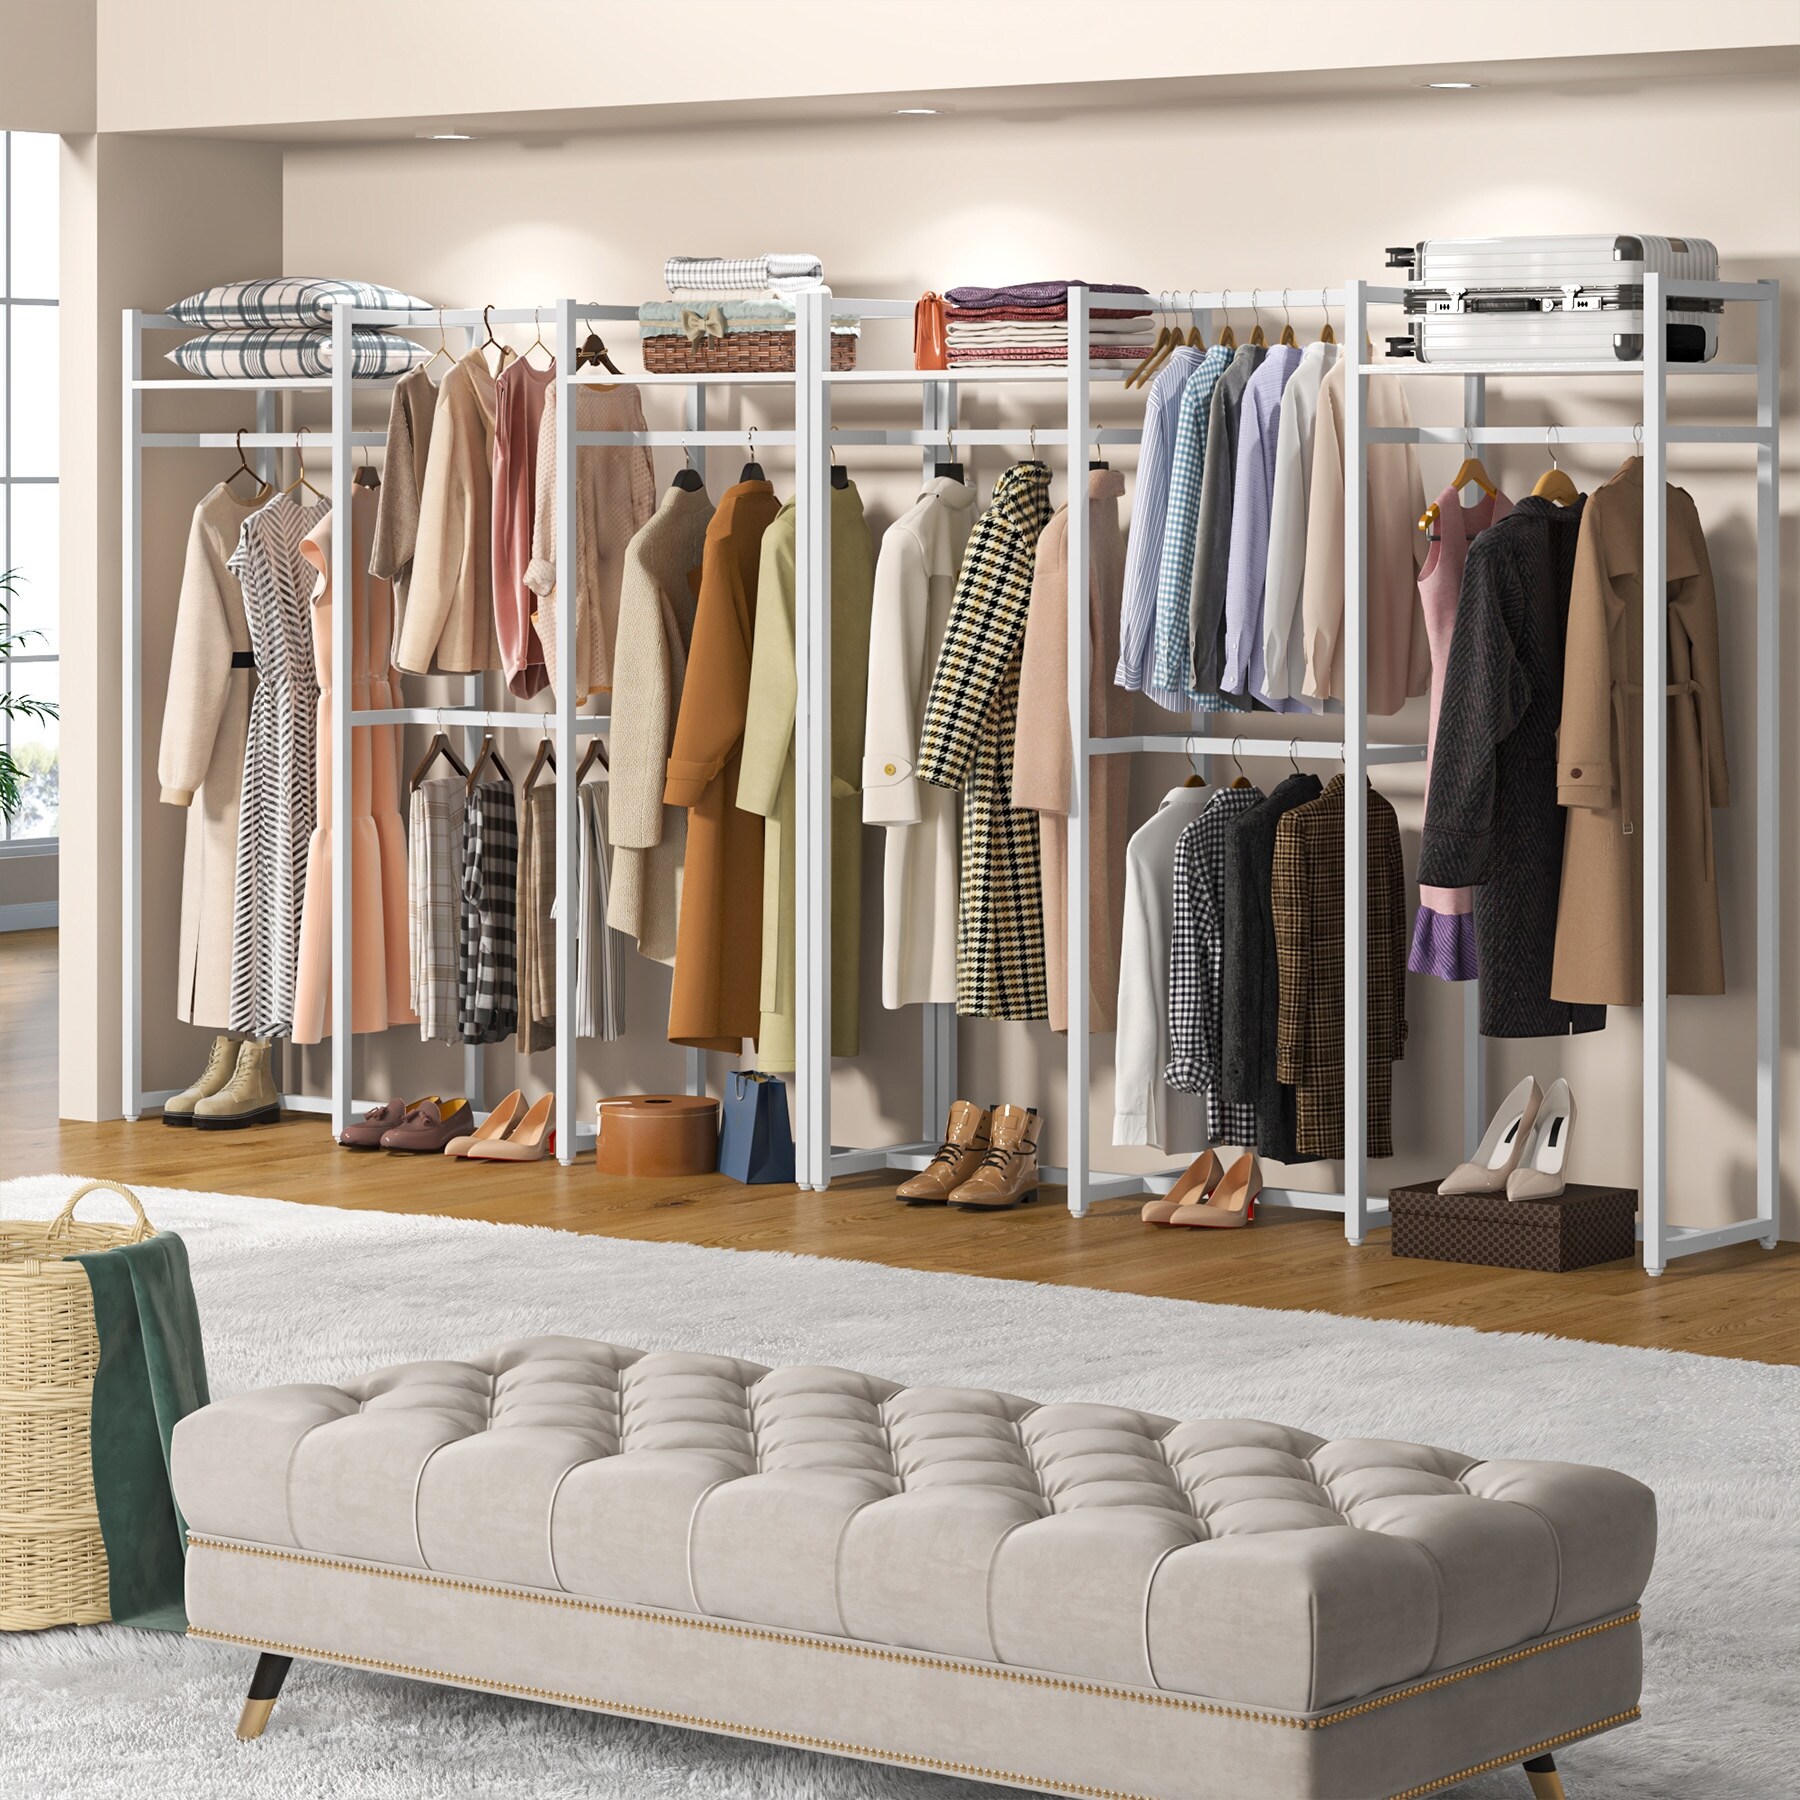 https://ak1.ostkcdn.com/images/products/is/images/direct/0ba5dce540745b5386642bf67e684d62a7d75d81/Free-Standing-Closet-Organizer-with-Hanging-Rods%2C-Garment-Rack-Heavy-Duty-Clothes-Rack-with-Storage-Shelves%2C-Max-Load-500LBS.jpg